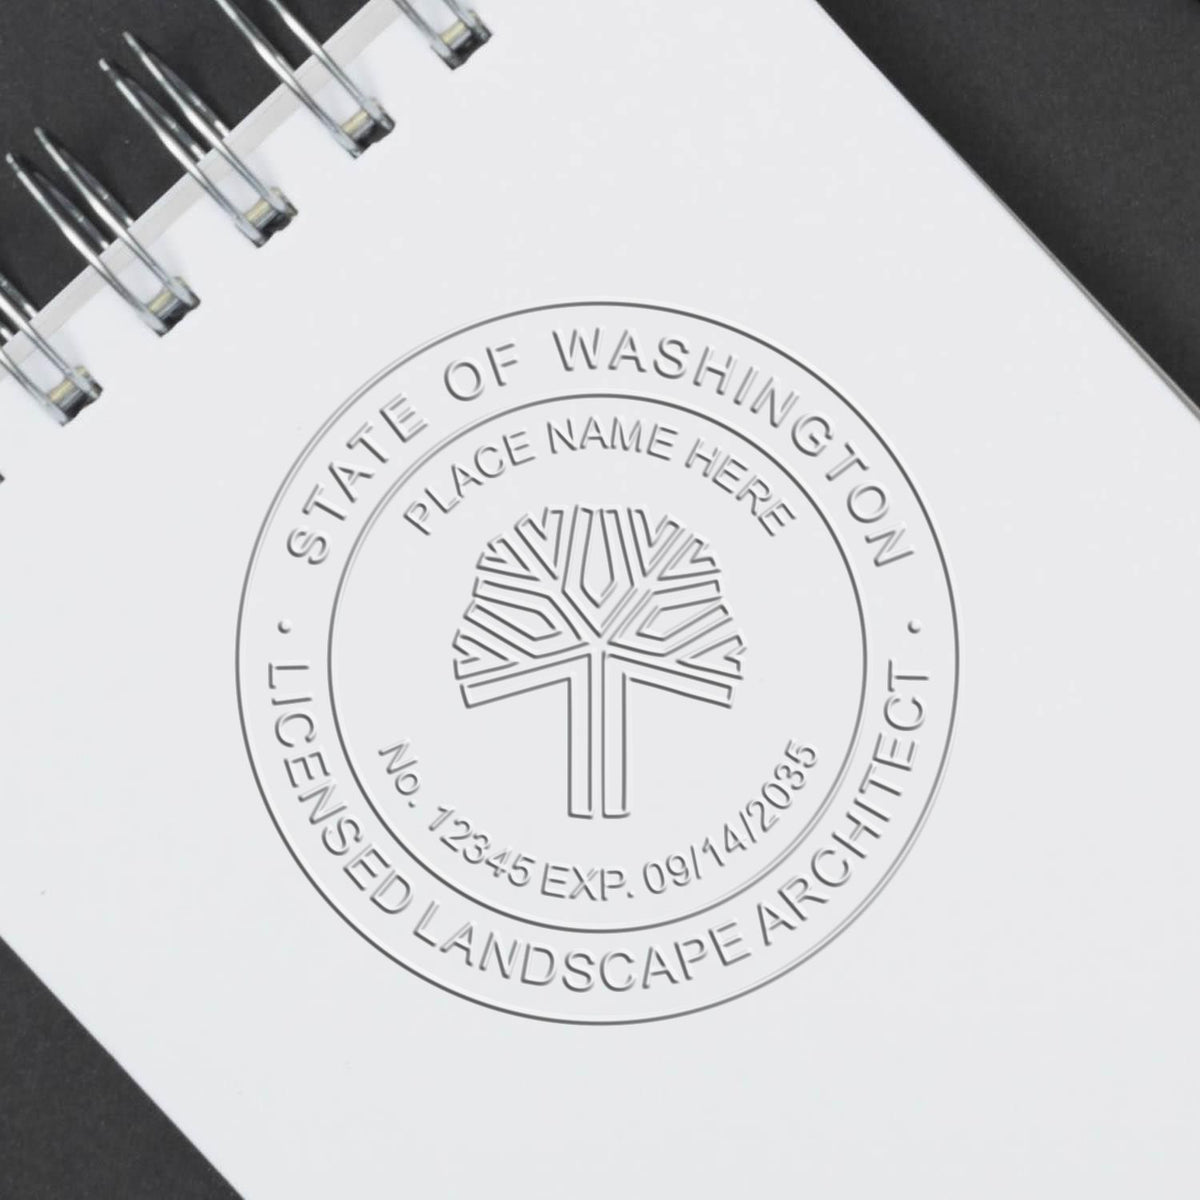 A stamped imprint of the Gift Washington Landscape Architect Seal in this stylish lifestyle photo, setting the tone for a unique and personalized product.